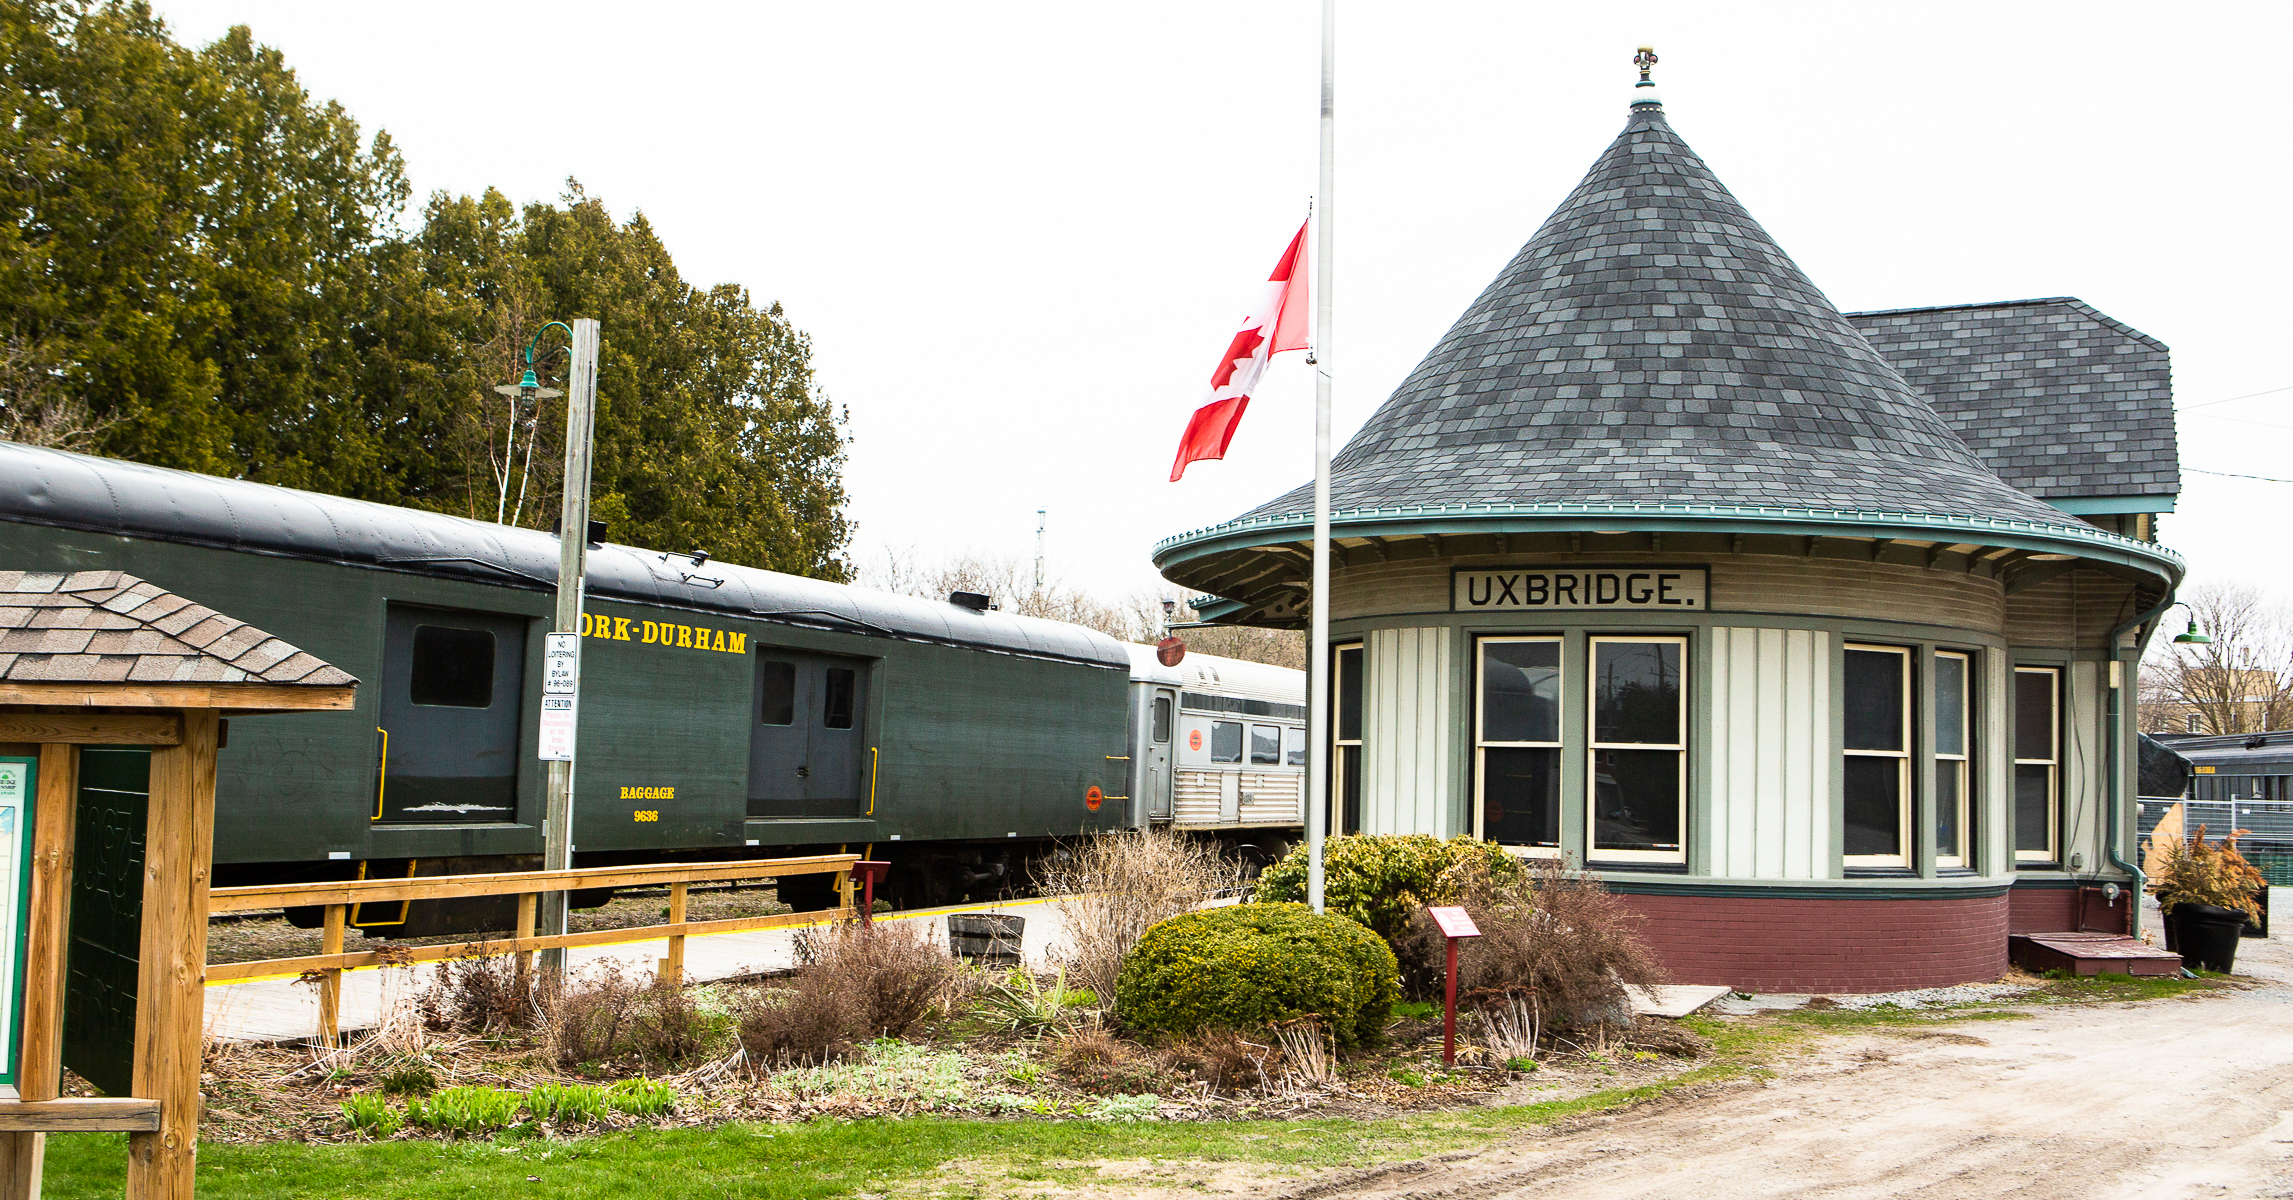 Image is of the York Durham Heritage Railway train station that has a roof that looks like a witch hat. There is a train with a baggage car parked near the station. A Canadian flag waves on a pole and the background is lined with trees.